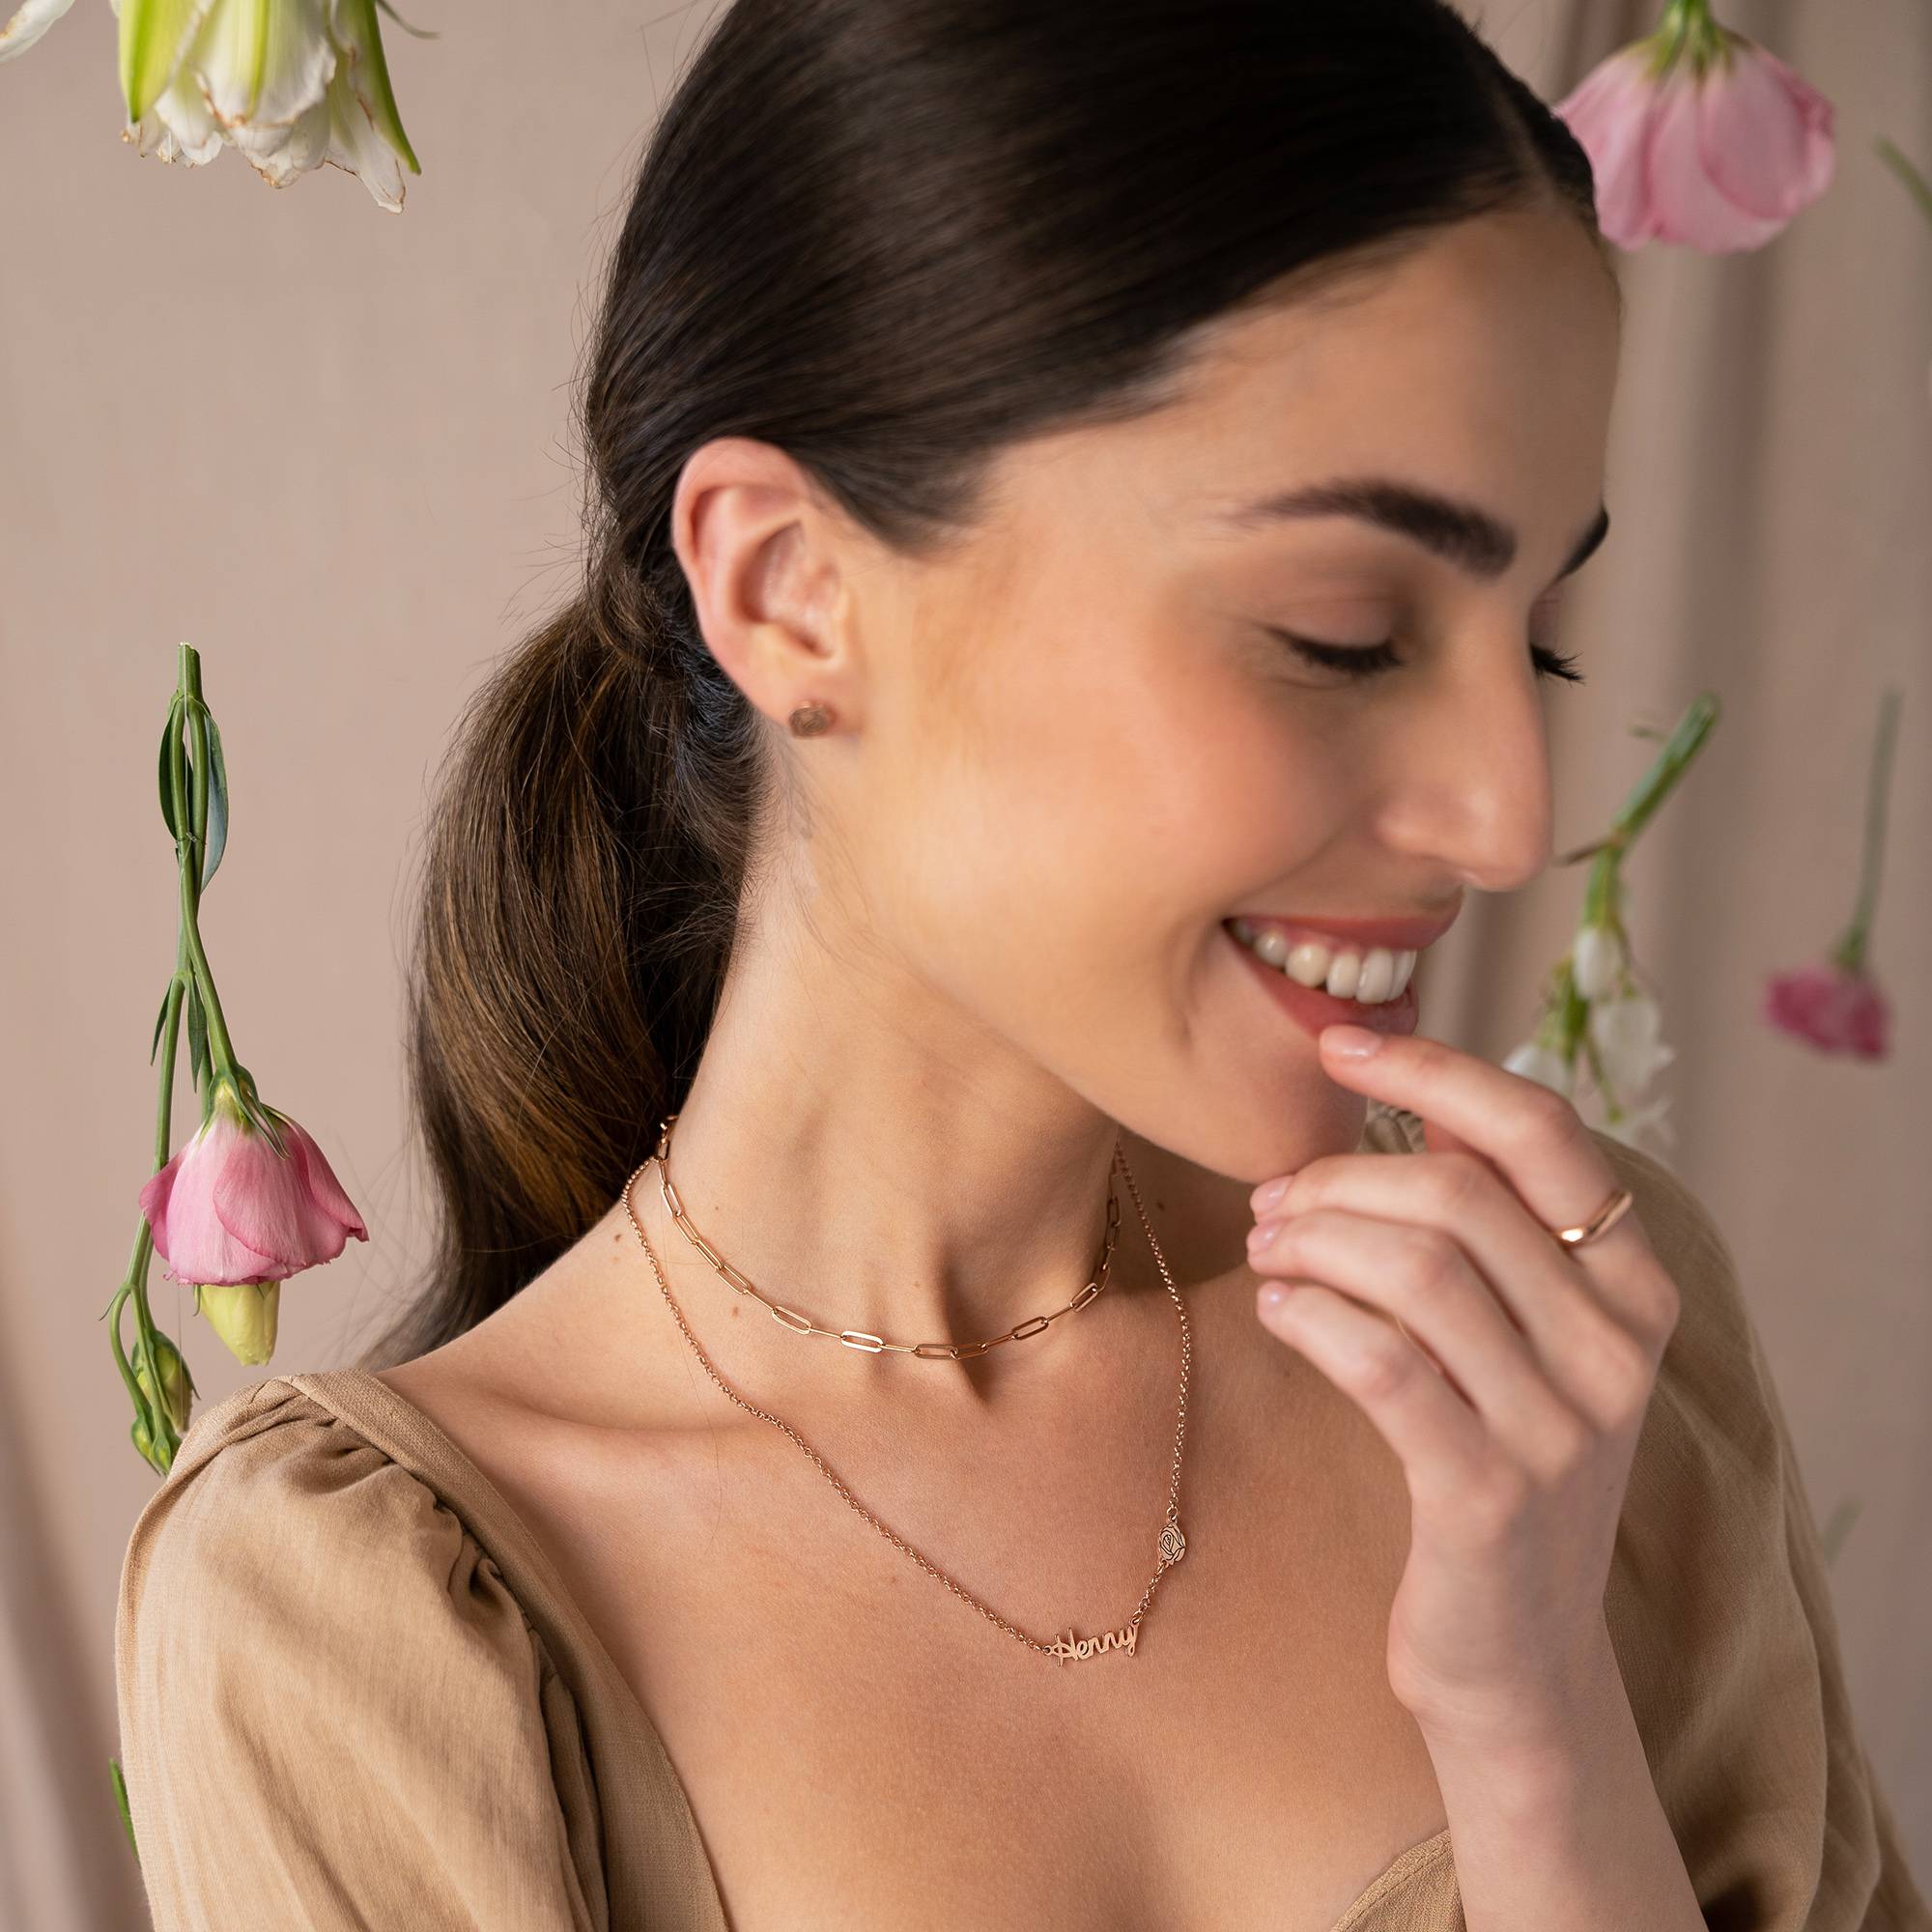 Blooming Birth Flower Multi Name Necklace in 18K Rose Gold Plating-6 product photo